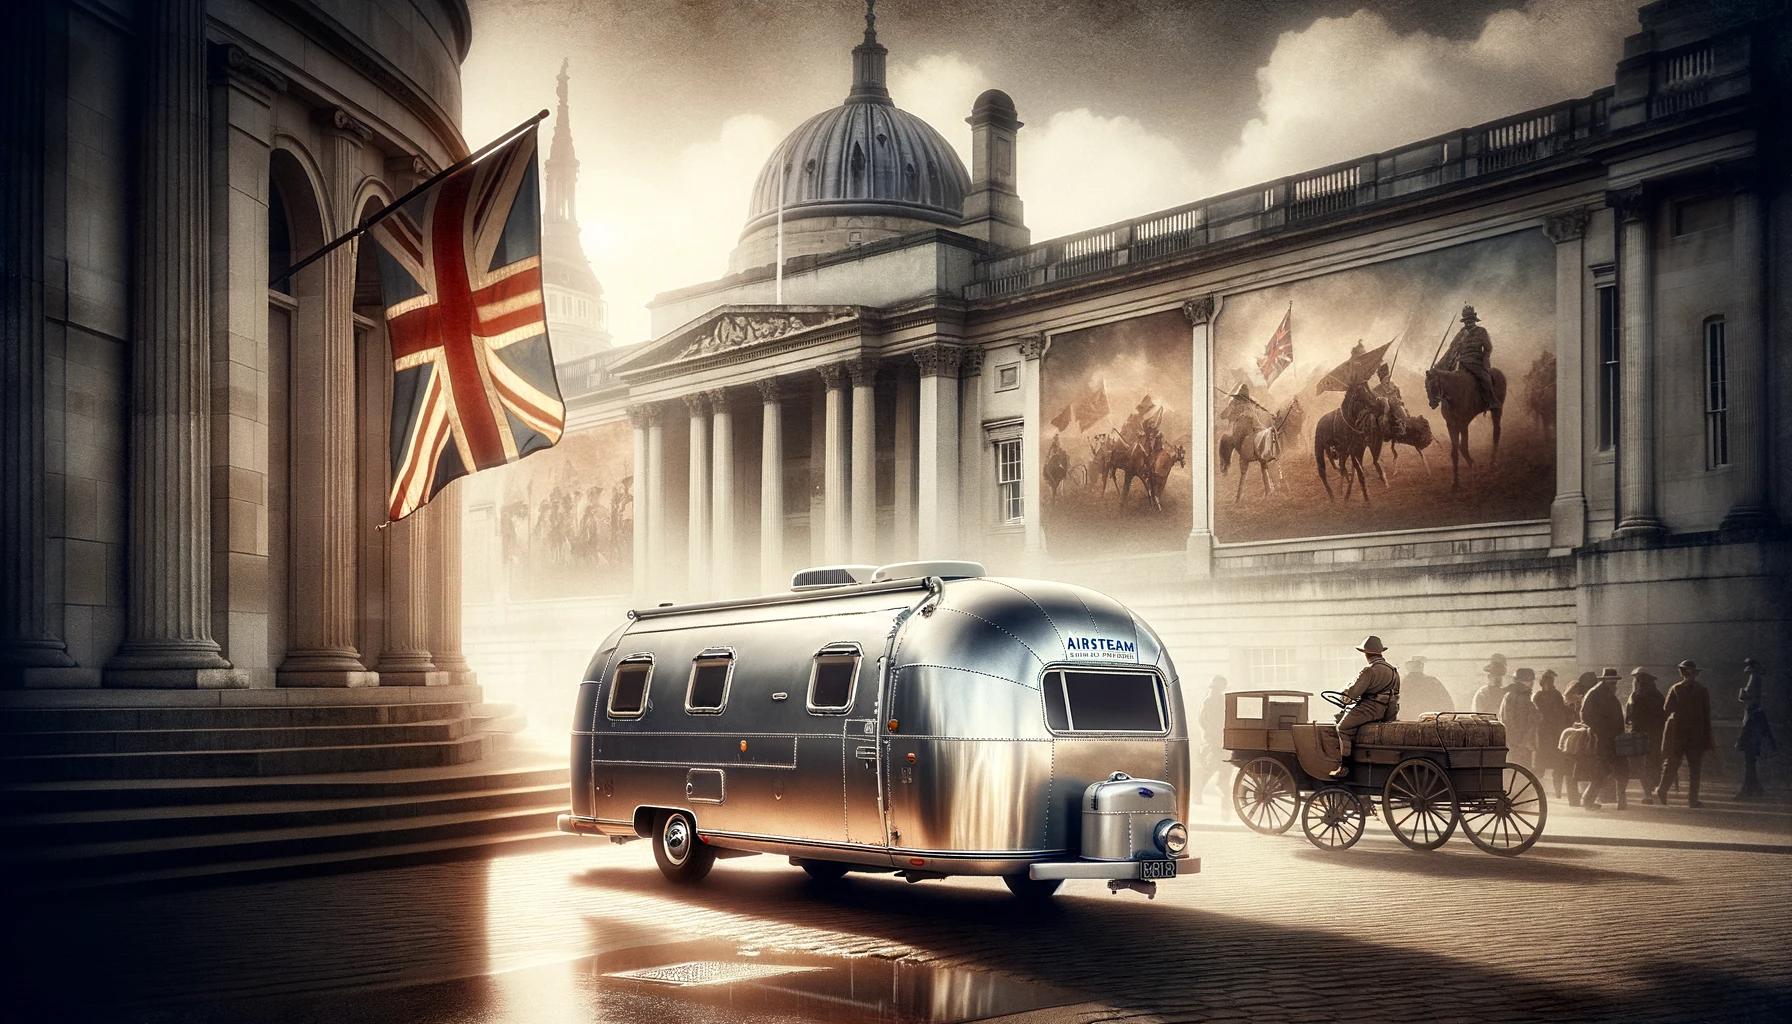 A vintage Airstream caravan set in a scenic backdrop, evoking the rich history and enduring spirit of travel and exploration, symbolizing the iconic status of Airstream caravans in the UK's caravan community.